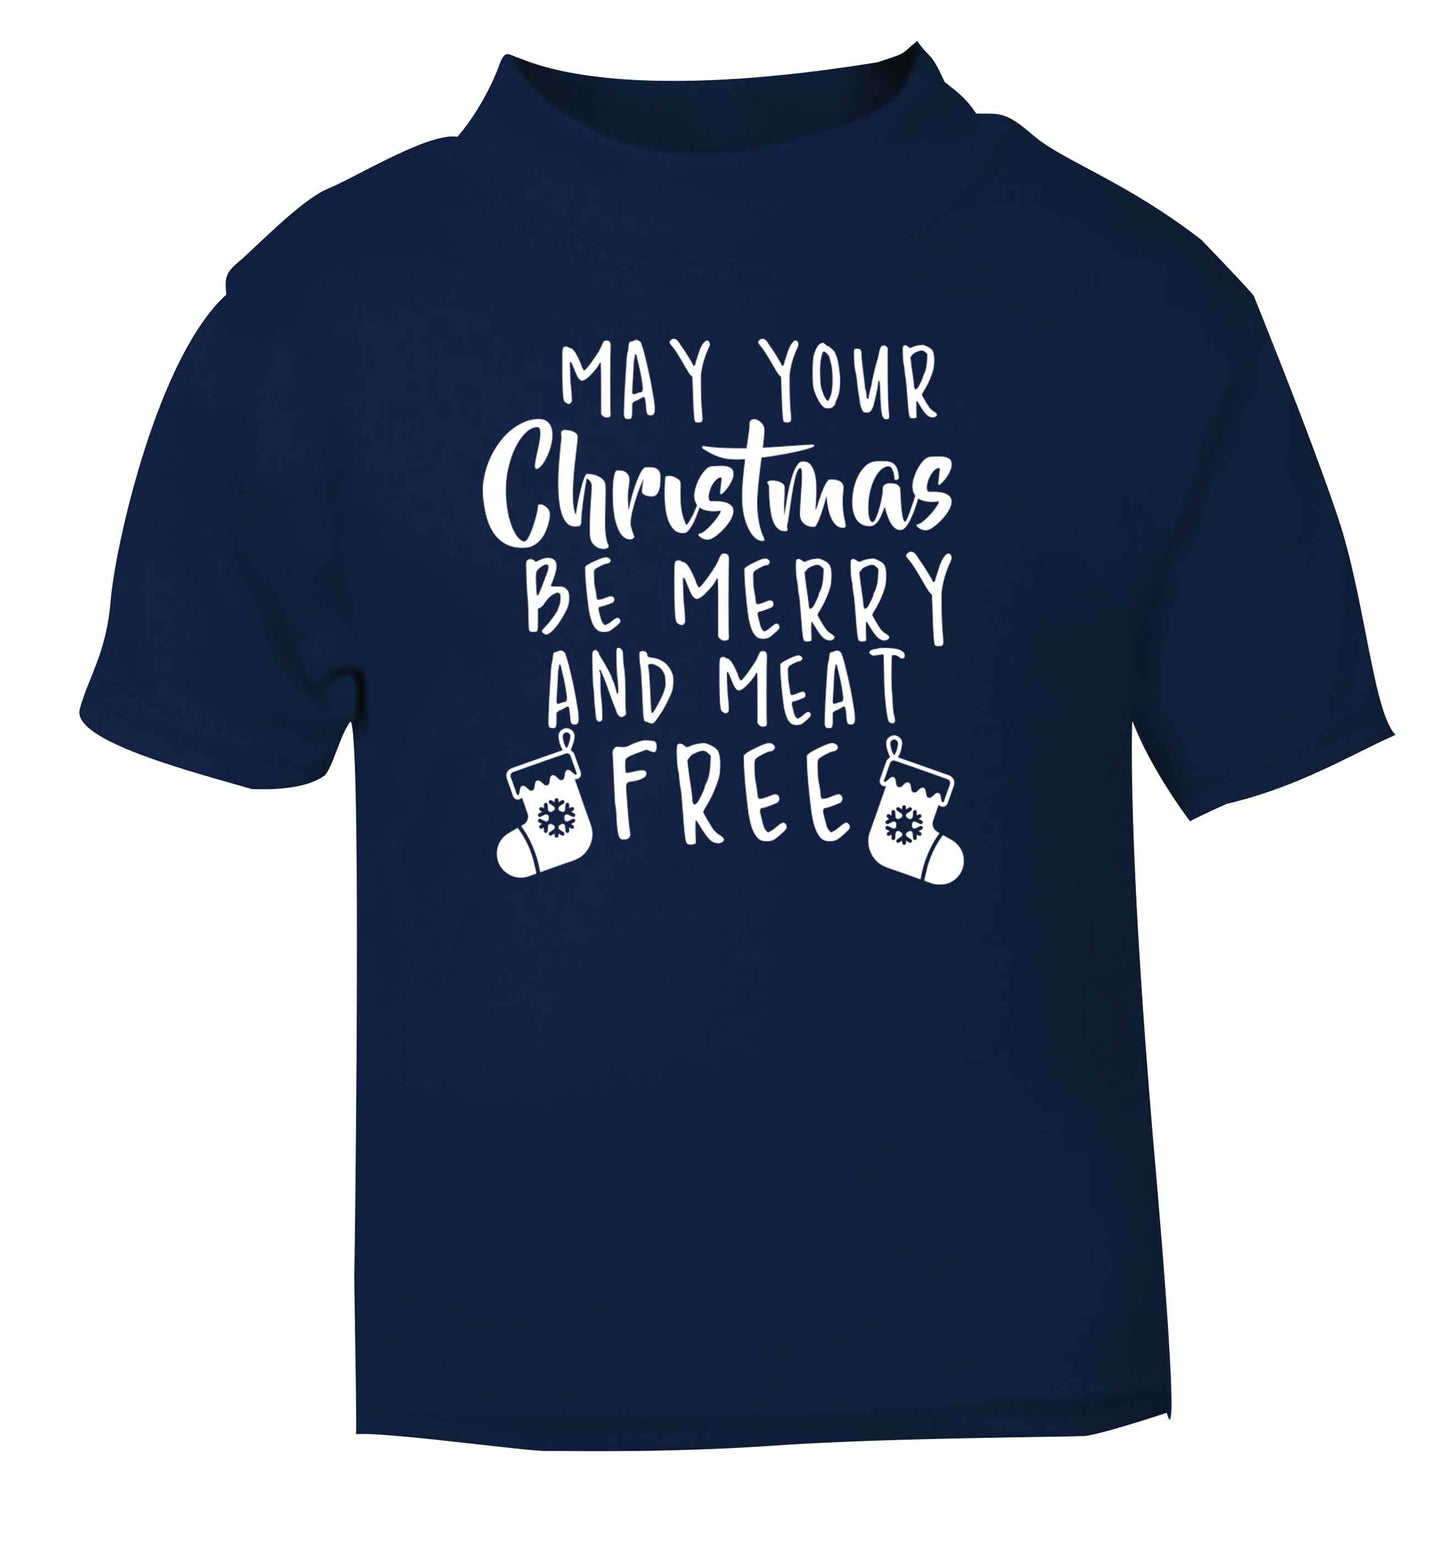 May your Christmas be merry and meat free navy Baby Toddler Tshirt 2 Years